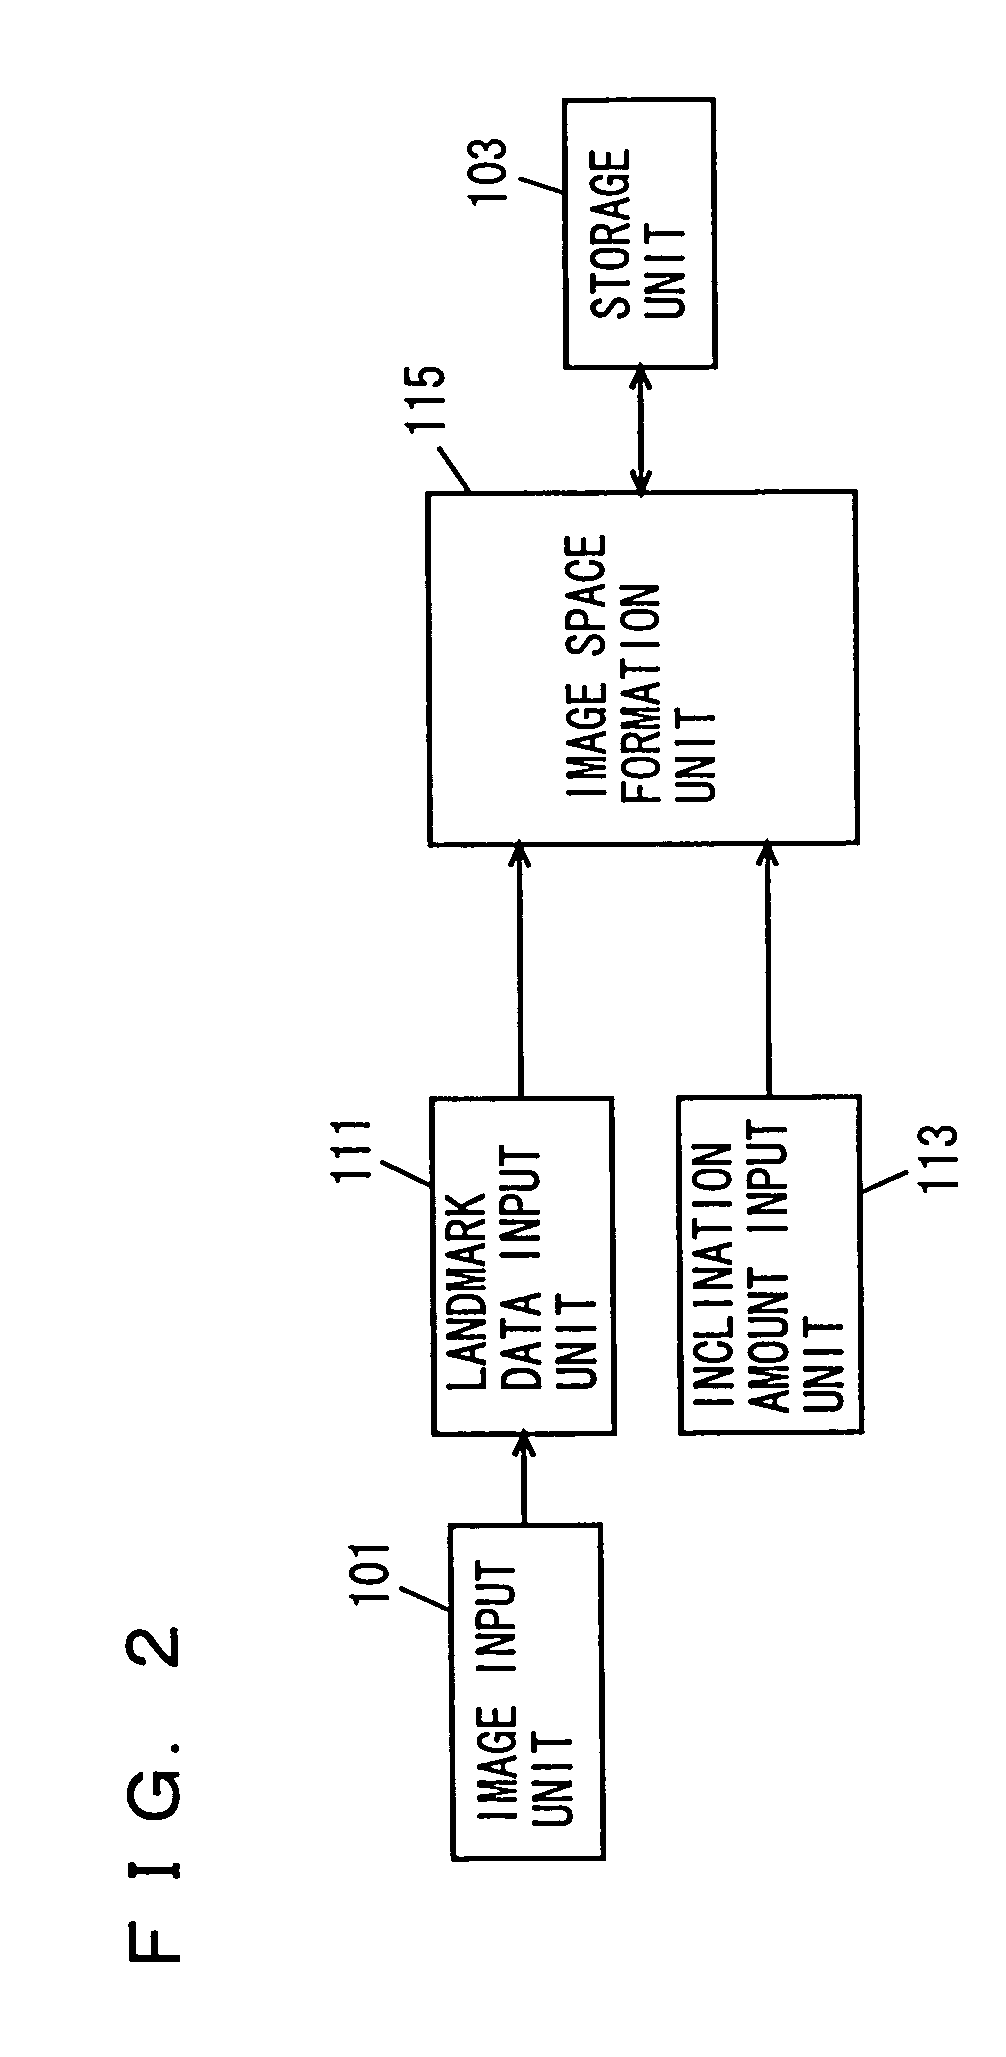 Image processing apparatus, image processing method, and recording medium recorded with image processing program to process image taking into consideration difference in image pickup condition using AAM